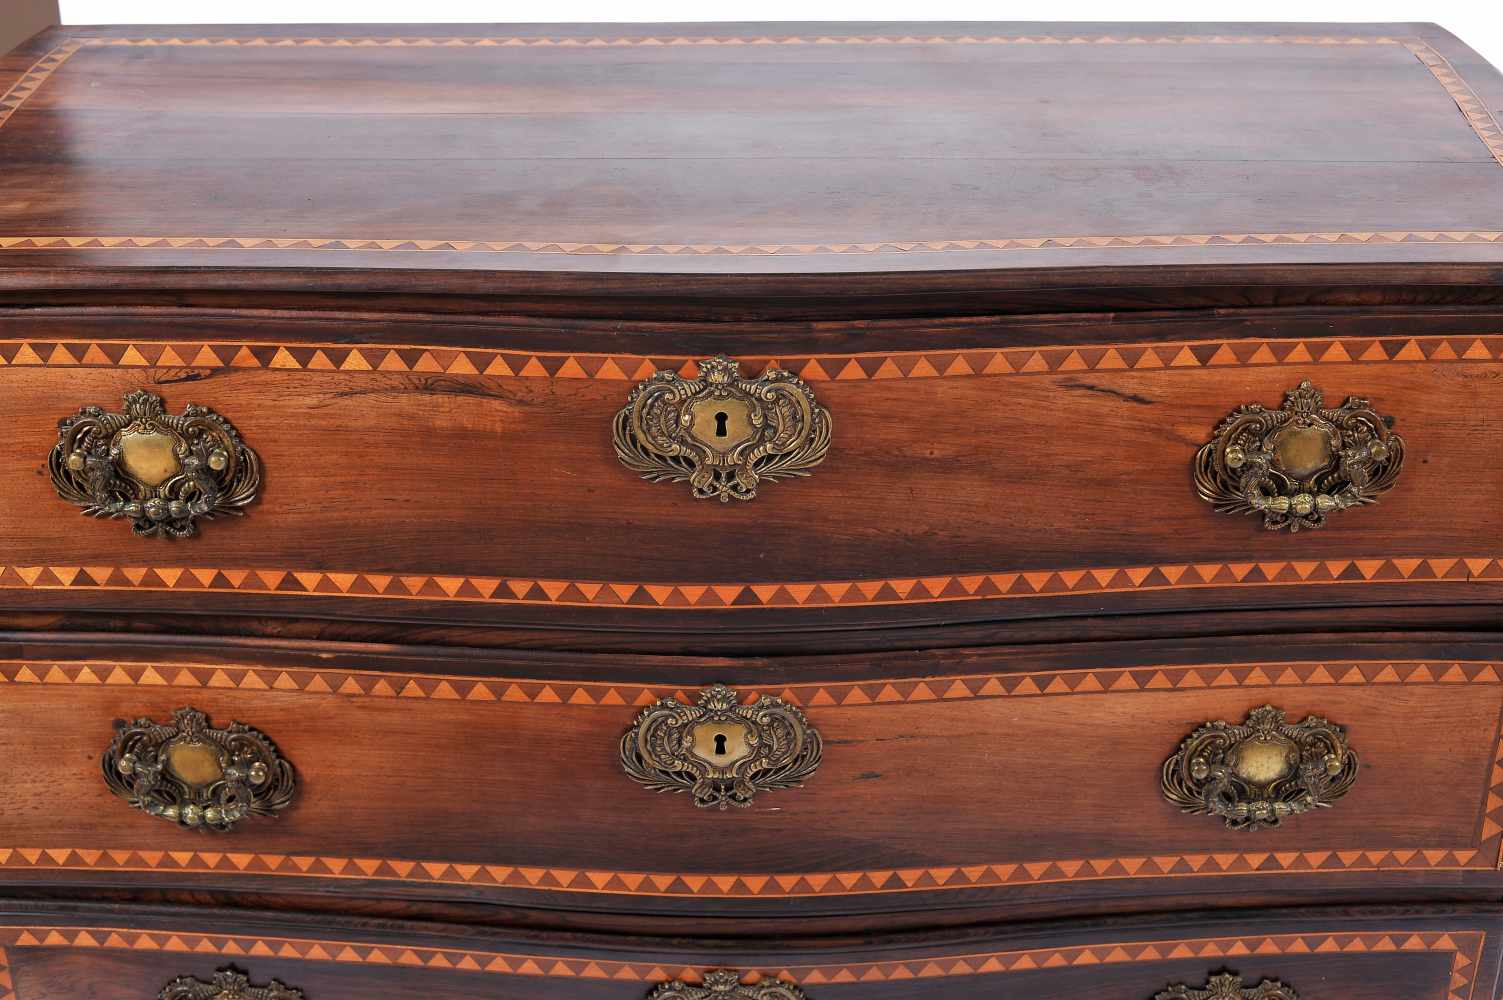 A Chest of Drawers, D. Maria I, Queen of Portugal (1777-1816), Brazilian rosewood, Brazilian - Image 2 of 2